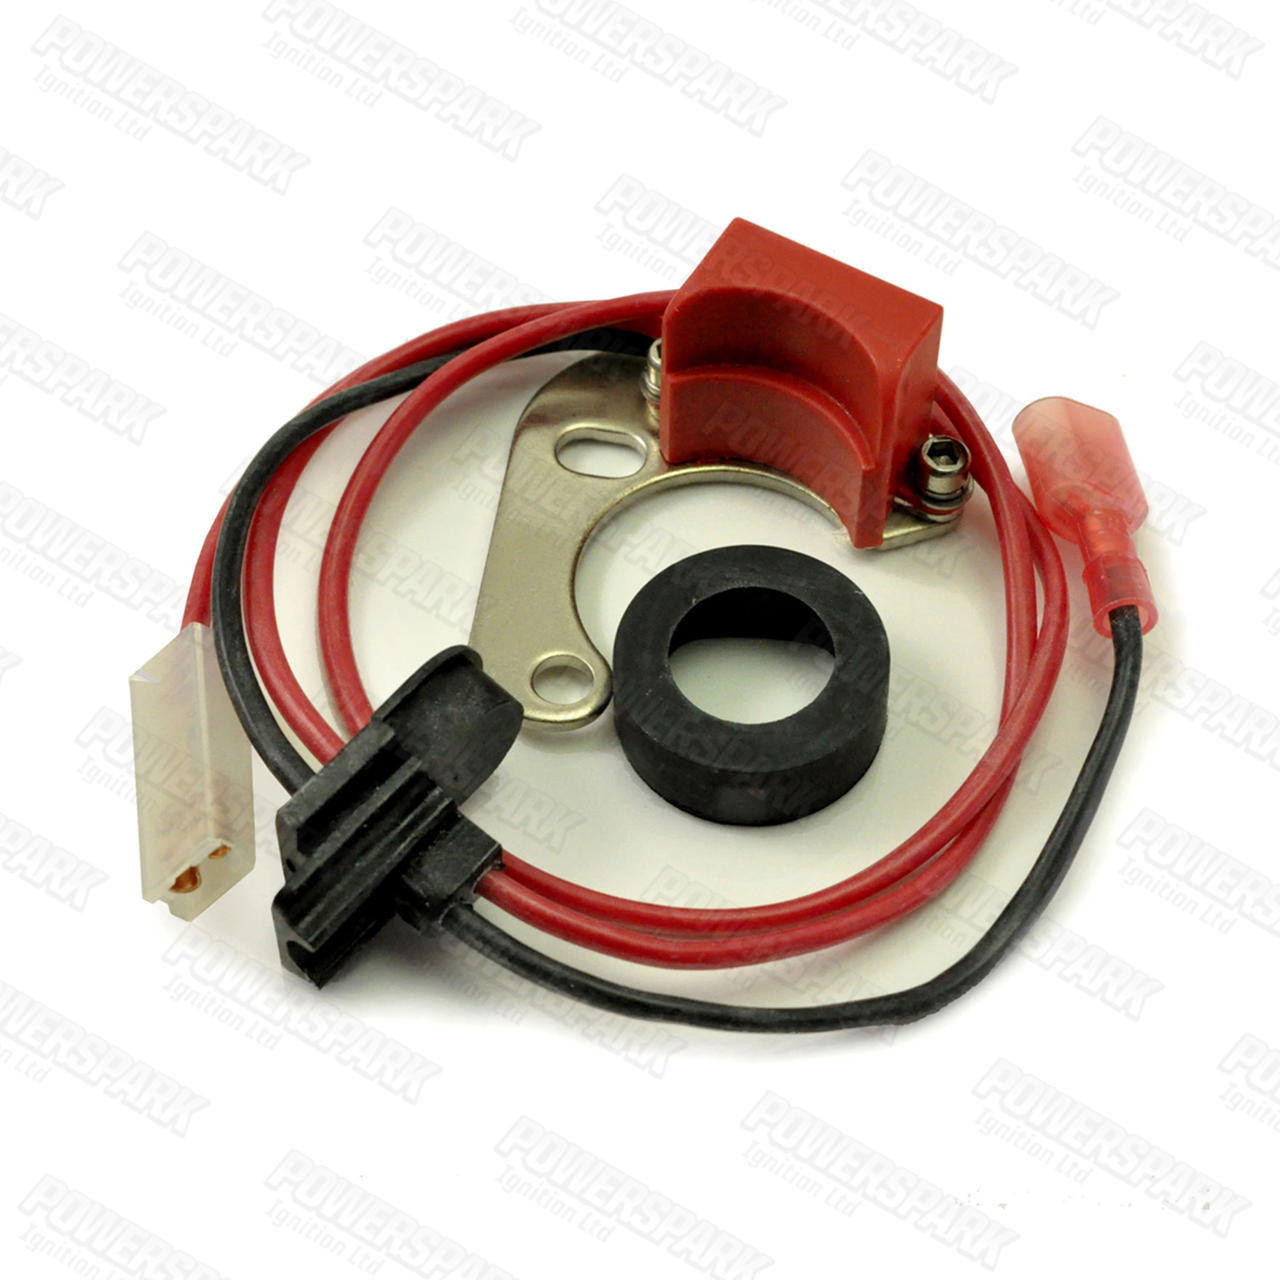  Powerspark Electronic Ignition Kit for Lucas DM2 EARLY (KM2_early)